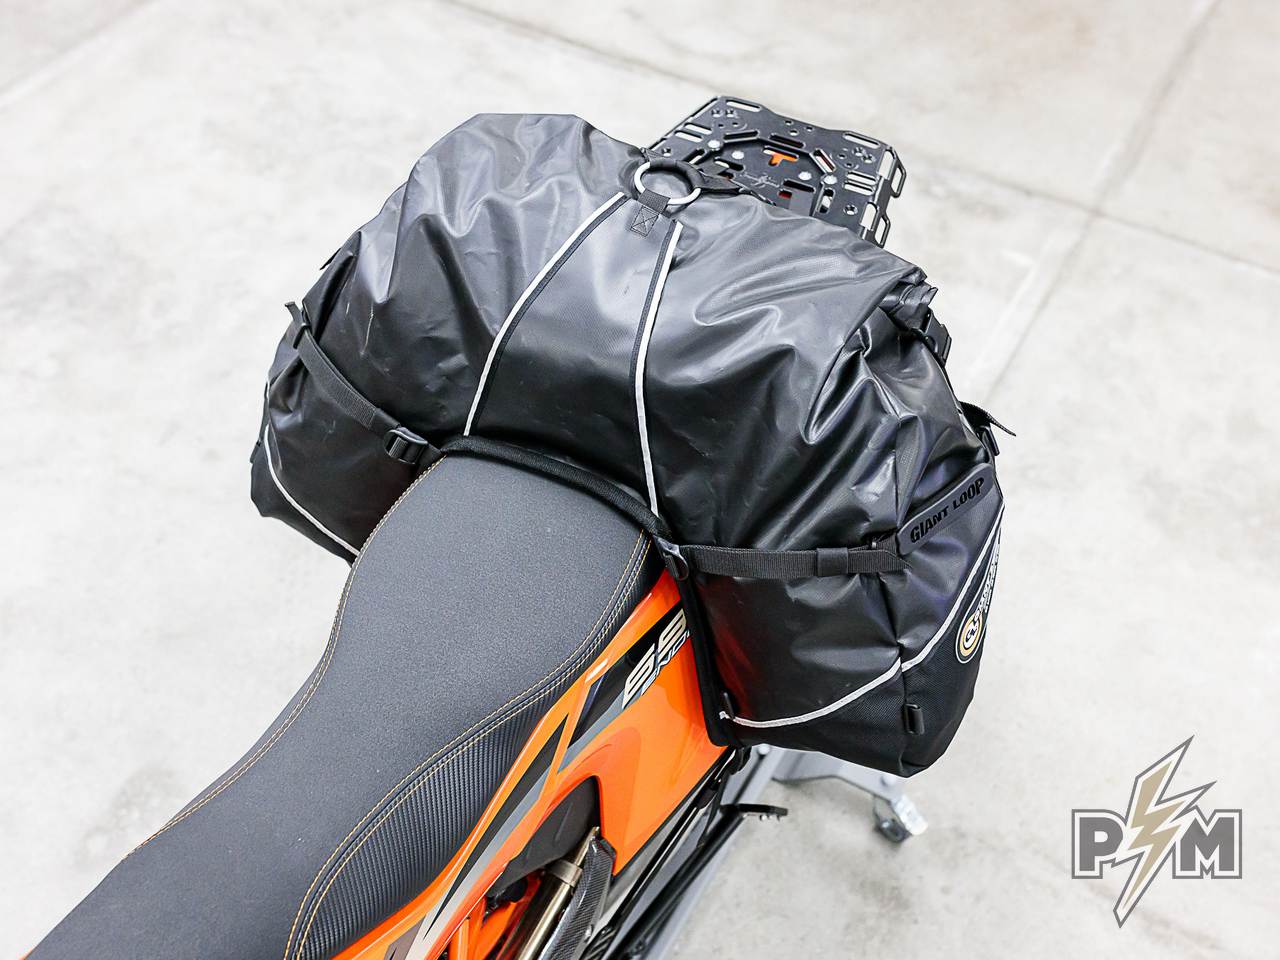 Perun moto KTM 690 Luggage rack, Extension plate and Heel guards with Giant Loop Great Basin